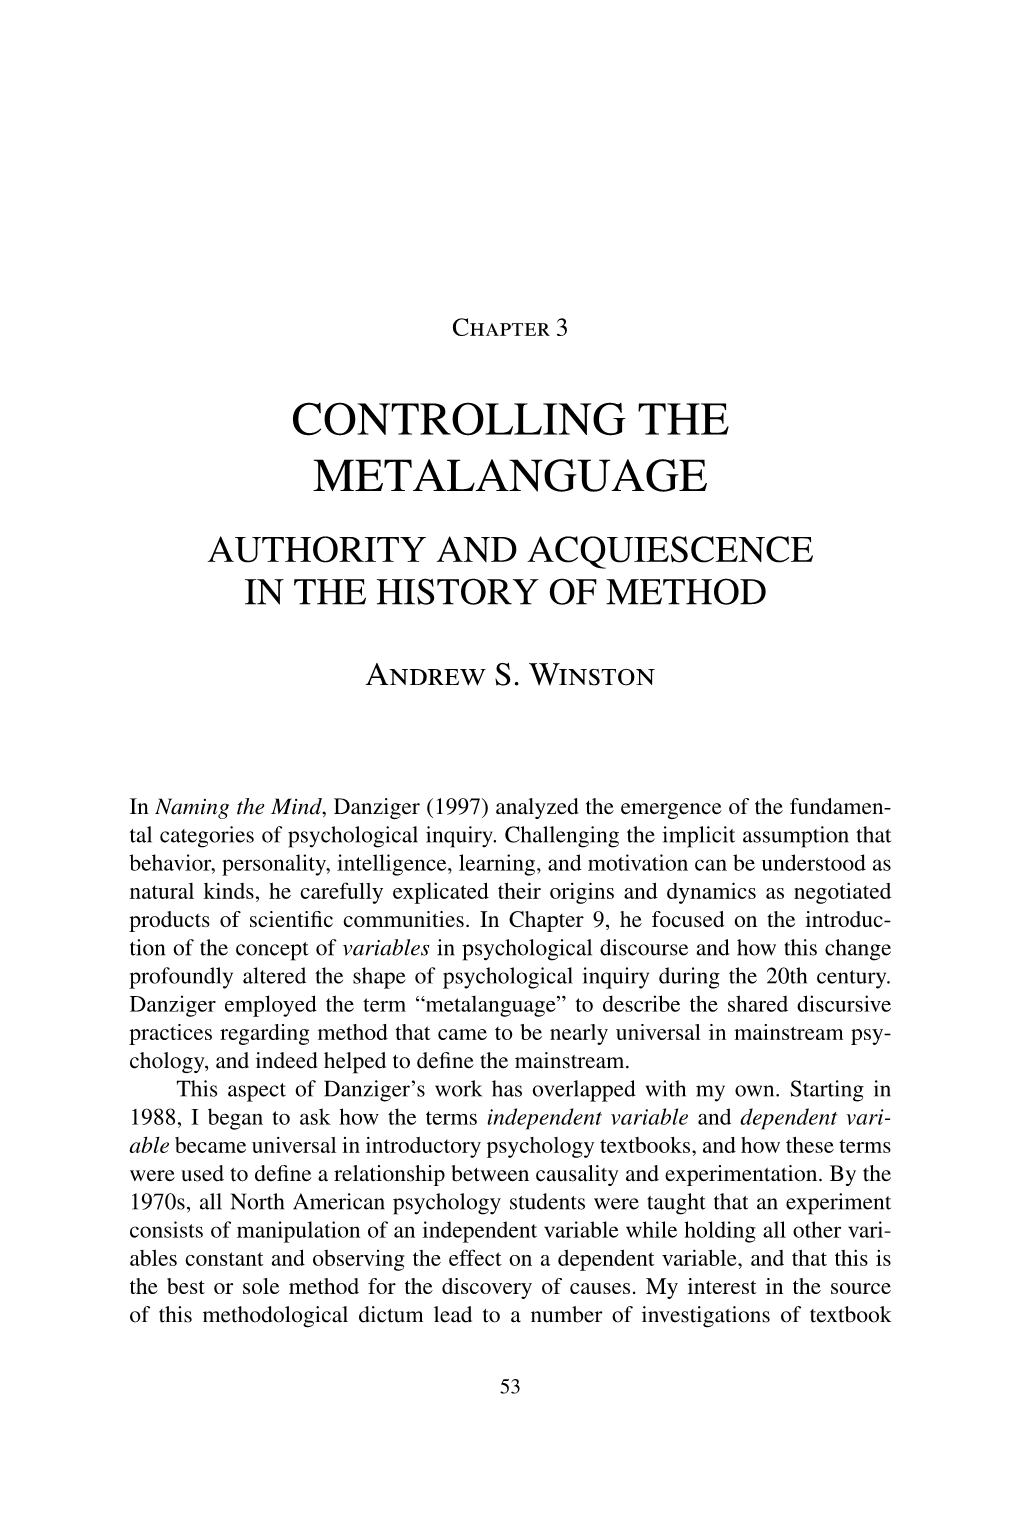 Controlling the Metalanguage Authority and Acquiescence in the History of Method